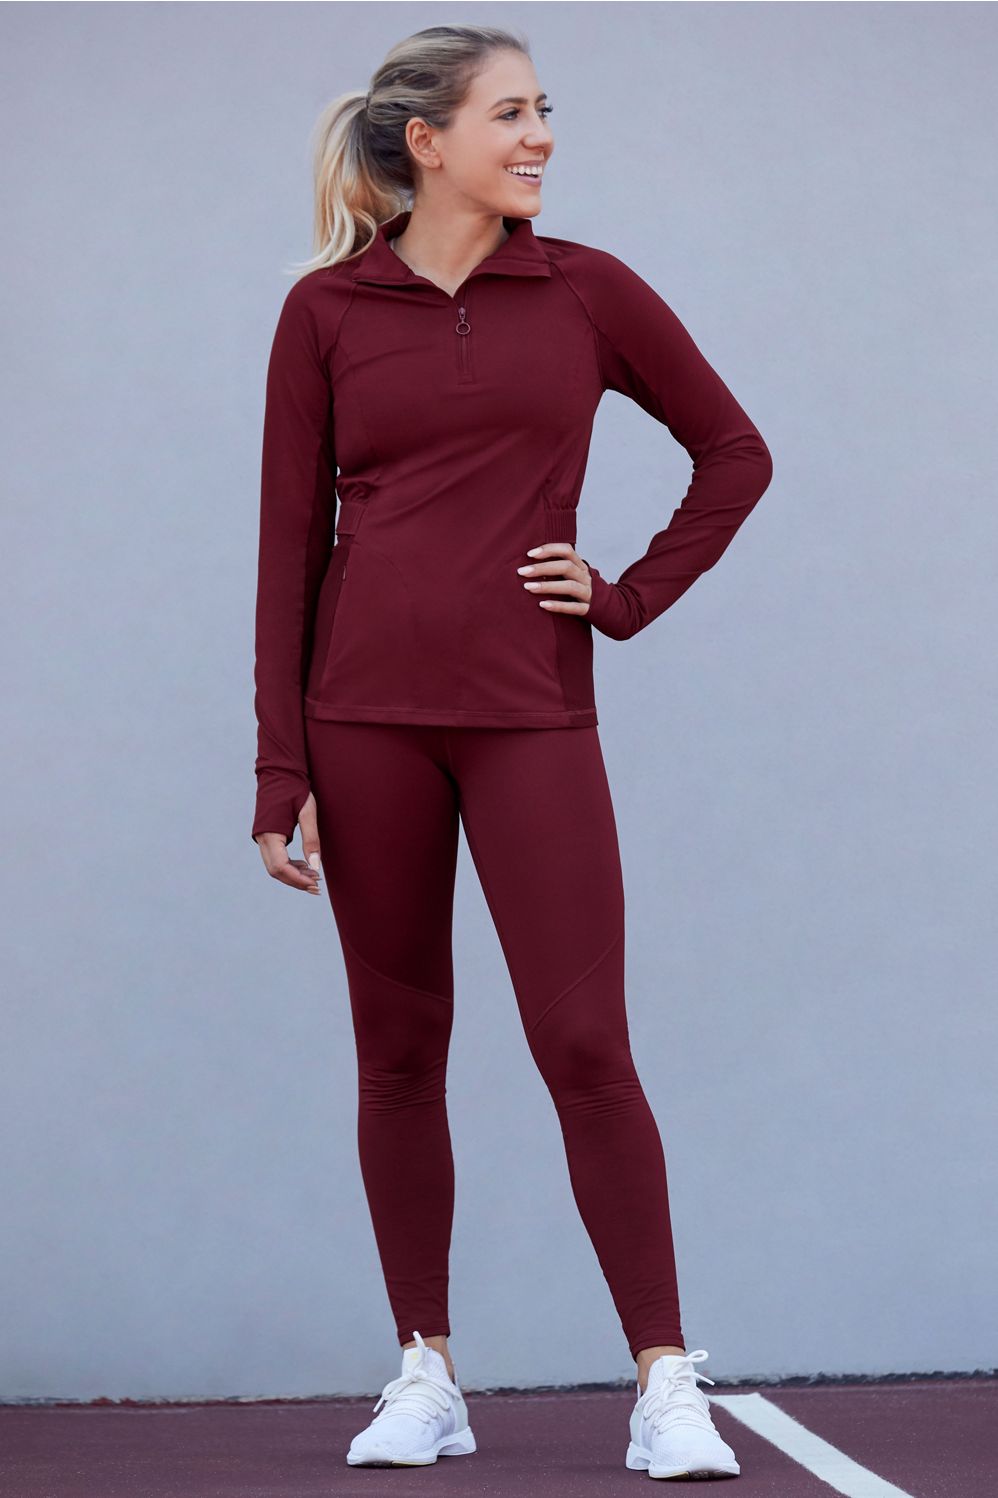 Essentials, Tops, Athleisure Lila Pullover Brushed Tech Stretch  Thumbholes Active Size 2x Refw22